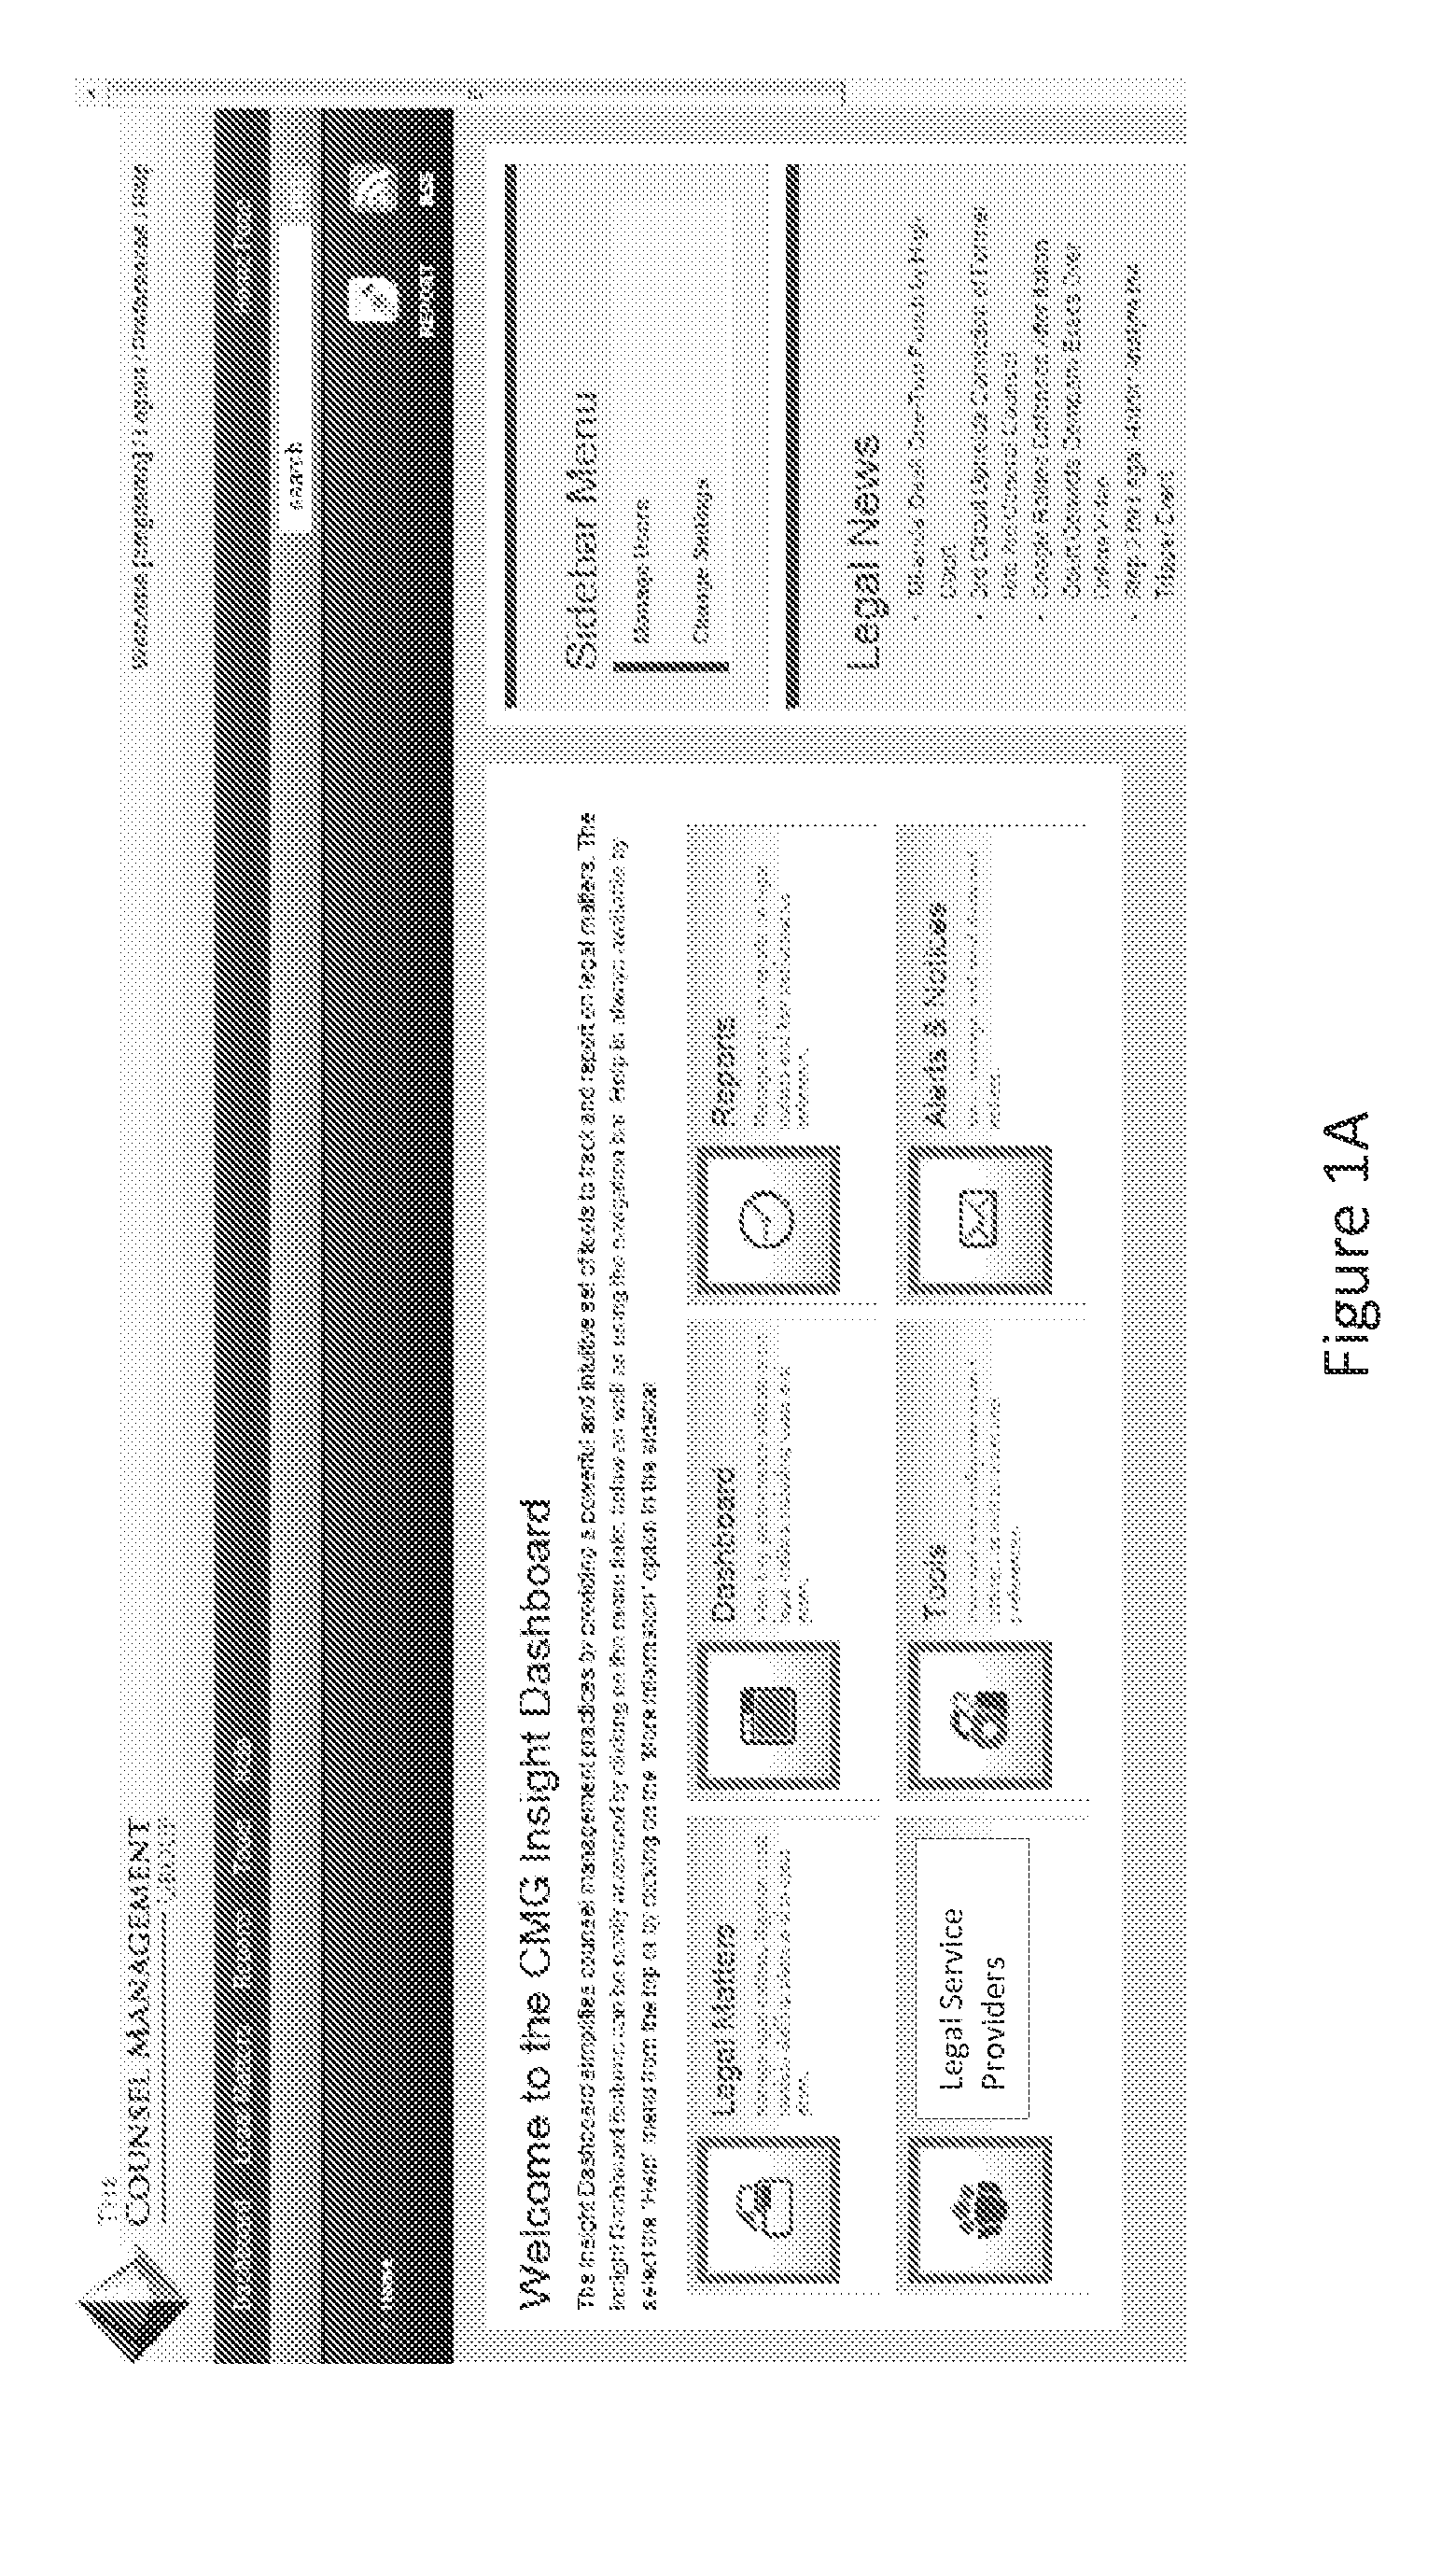 Systems and Methods for Analysis of Legal Service Providers and Comparative Unit Costs or Ratio Costs